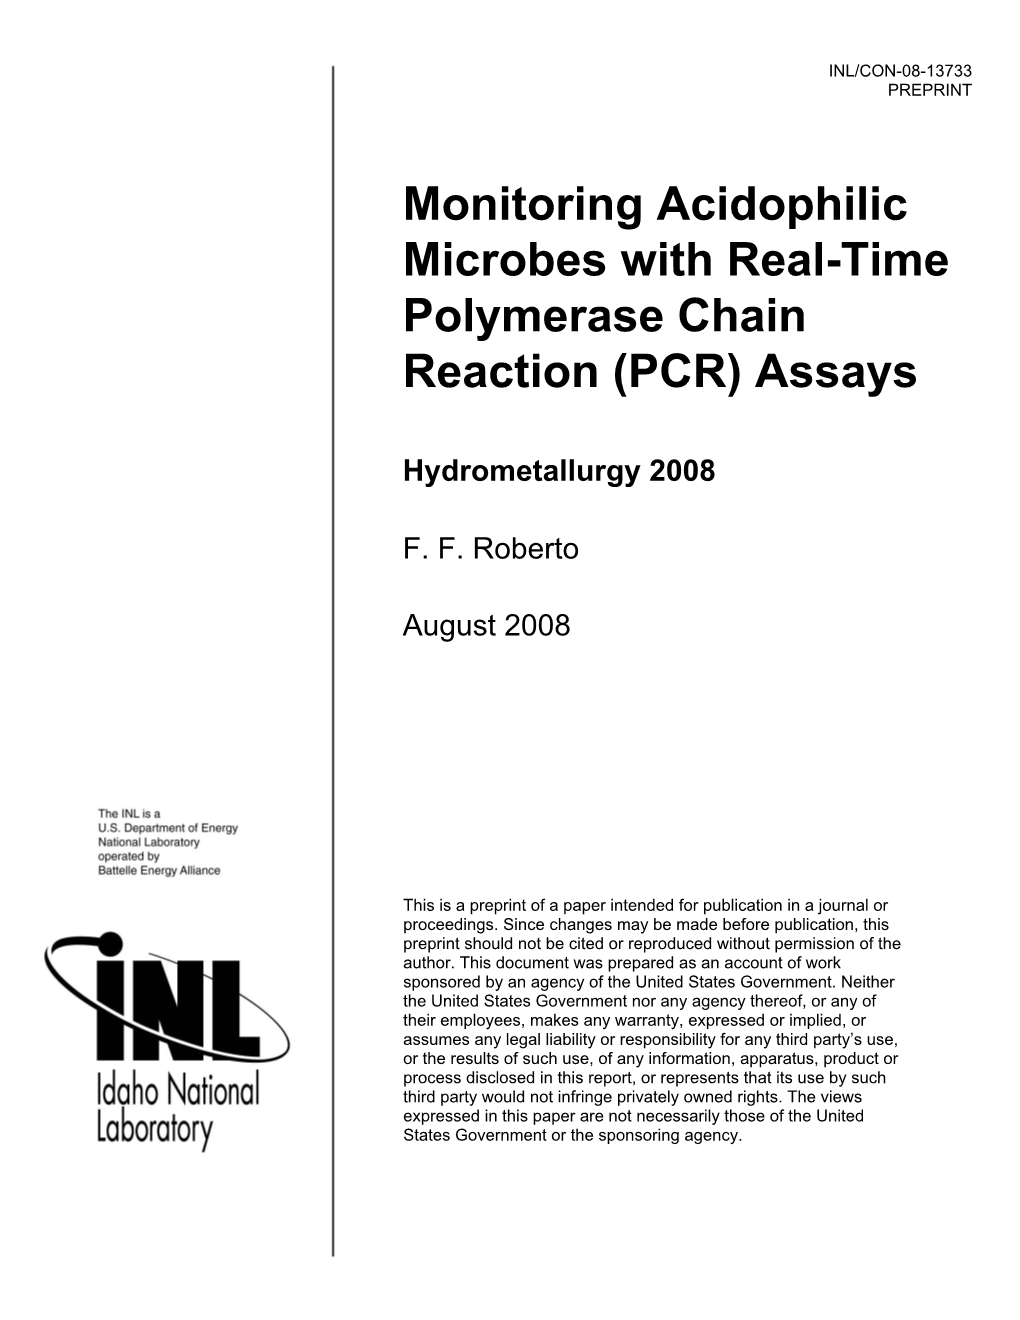 Monitoring Acidophilic Microbes with Real-Time Polymerase Chain Reaction (PCR) Assays